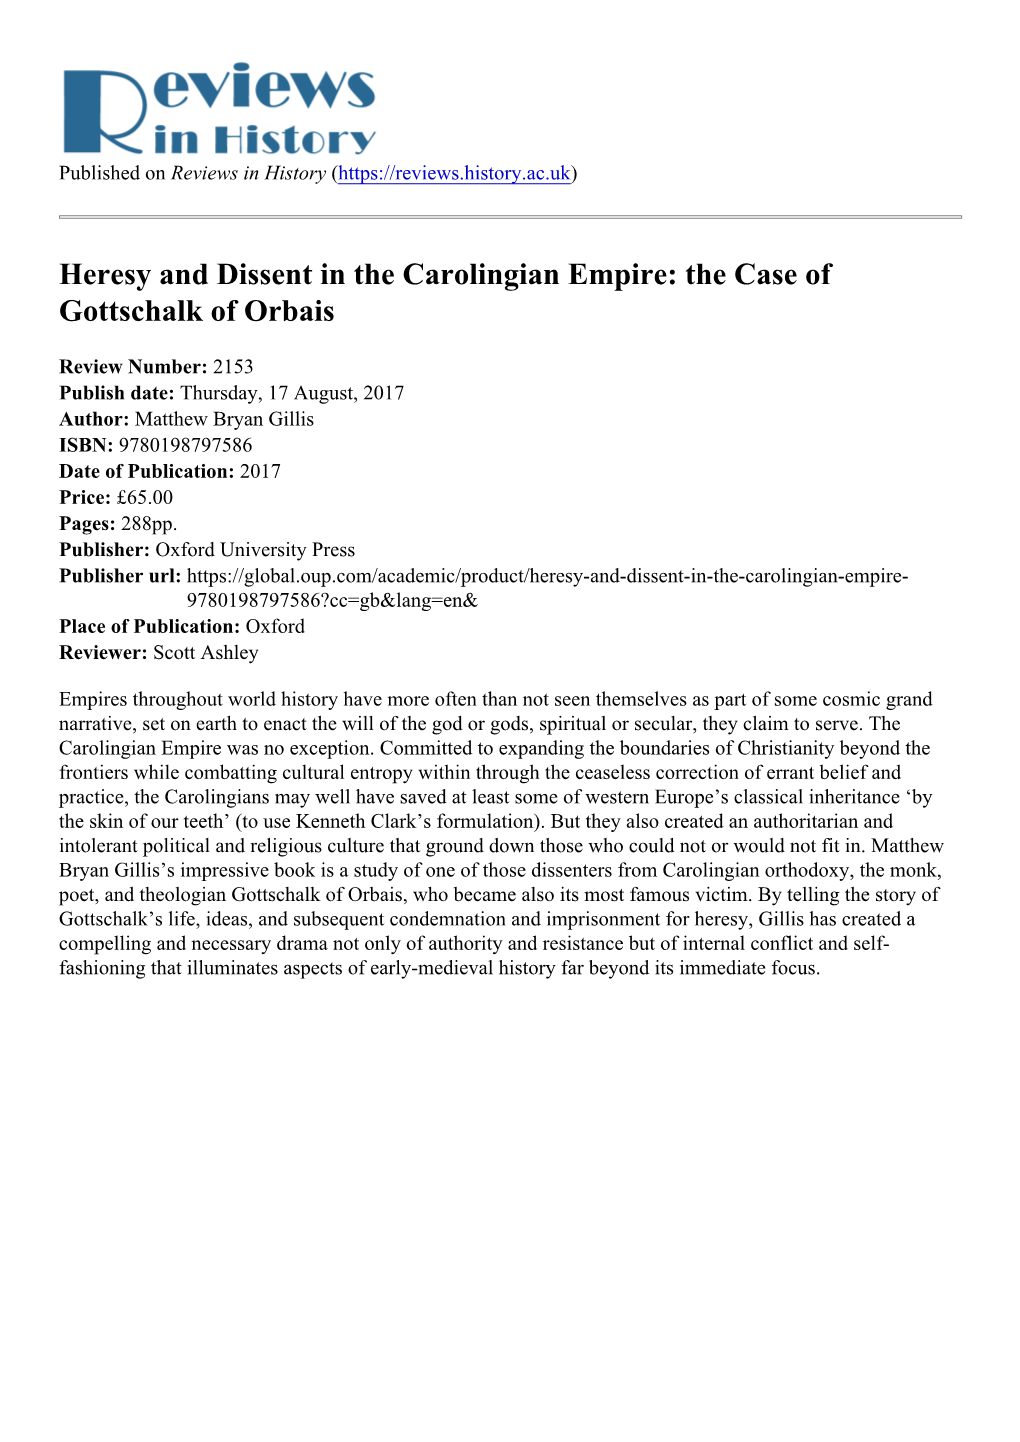 Heresy and Dissent in the Carolingian Empire: the Case of Gottschalk of Orbais